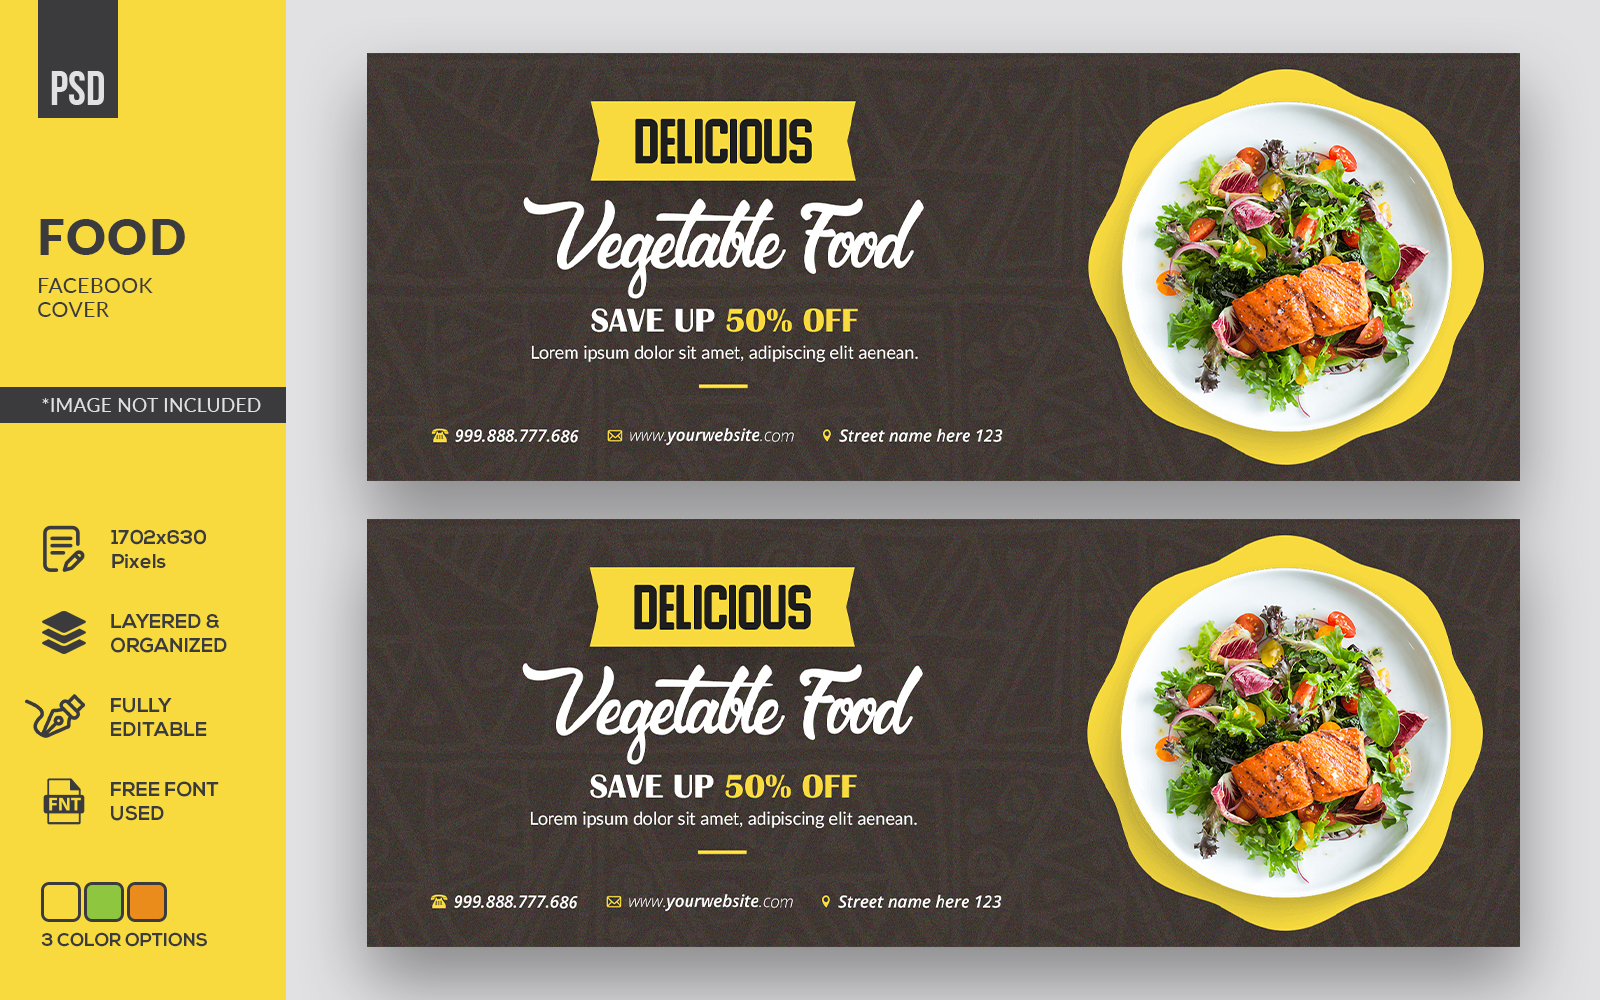 Food Facebook Cover - Corporate Identity Template